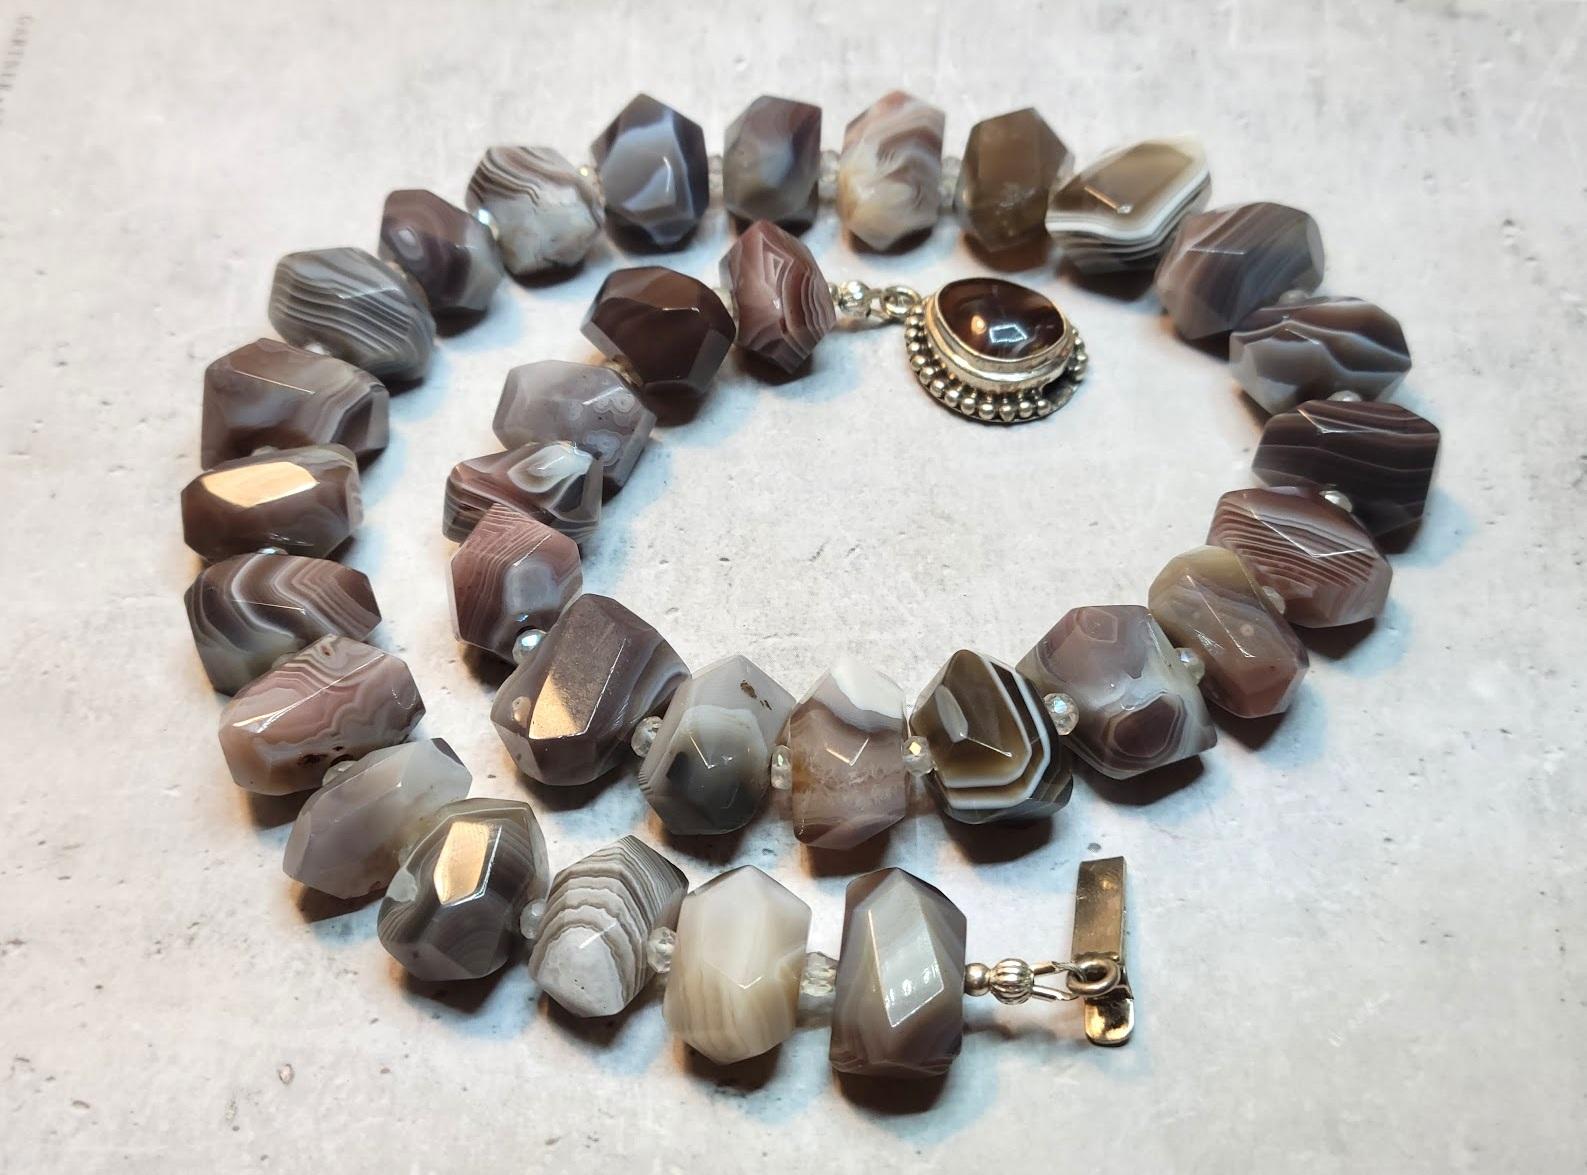 The length of the necklace is 19 inches (48 cm). The size of the beads is 11-15 mm x 17-20 mm.

Botswana Agate is a variety of banded Chalcedony, a mineral of the Quartz family. It is predominantly banded in pink and gray shades, though some layers